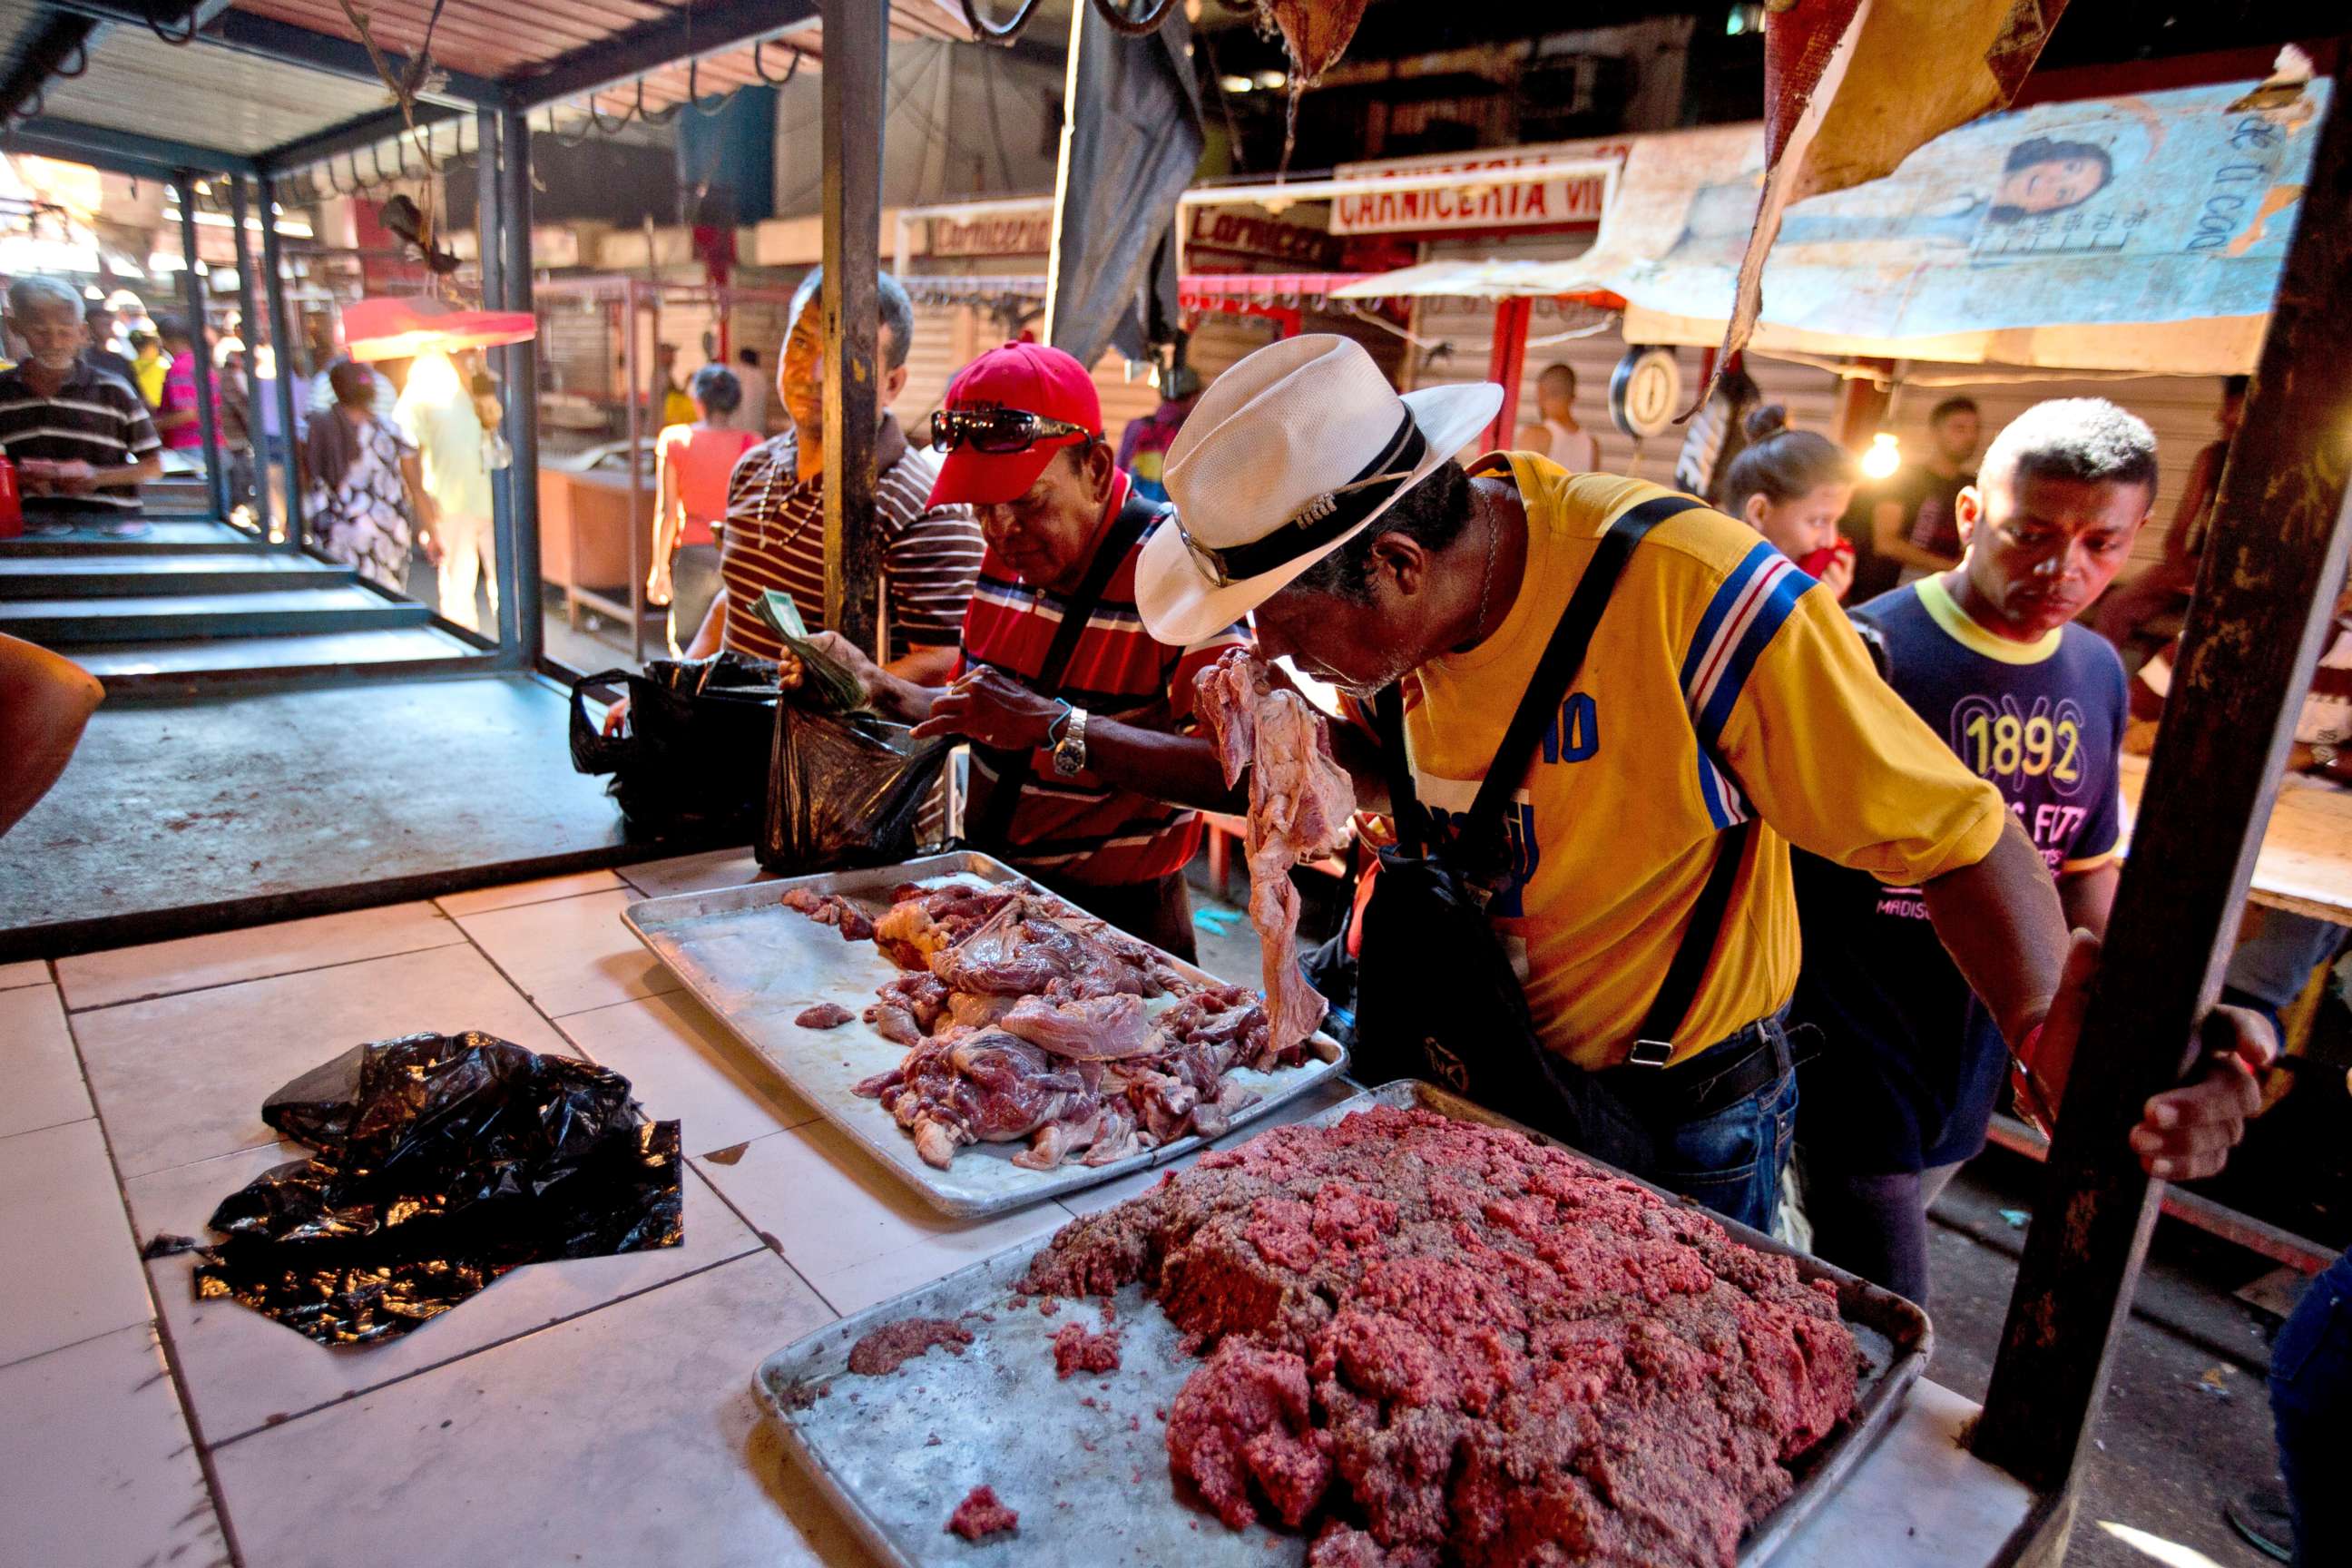 PHOTO: A customer smells a piece of spoiled meat at a market in Maracaibo, Venezuela, Aug. 19, 2018.